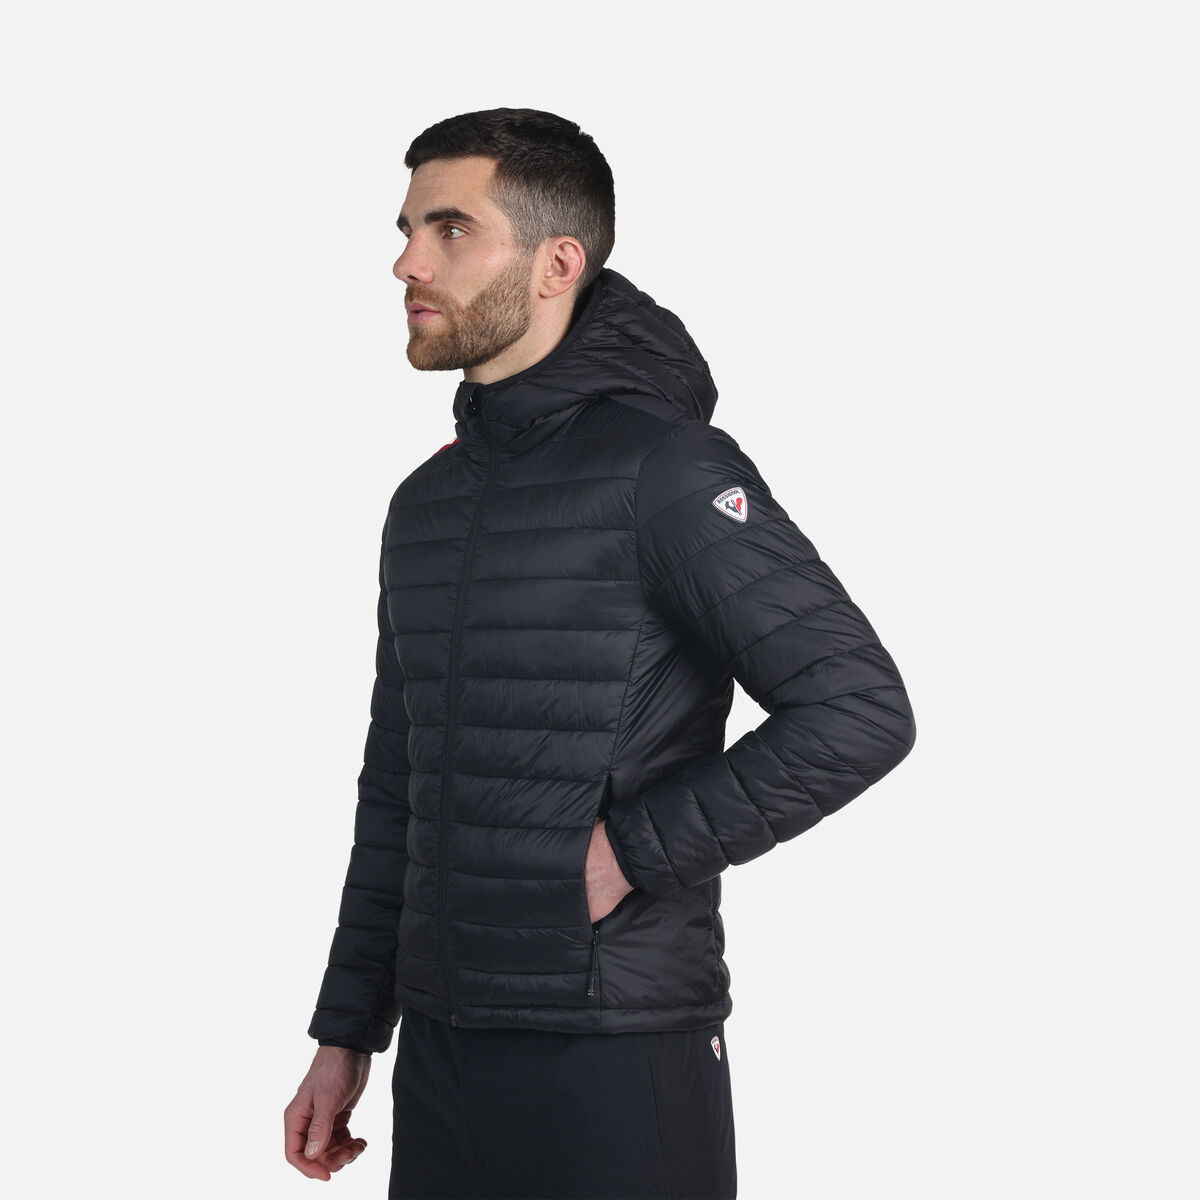 Men's hooded insulated jacket 100GR